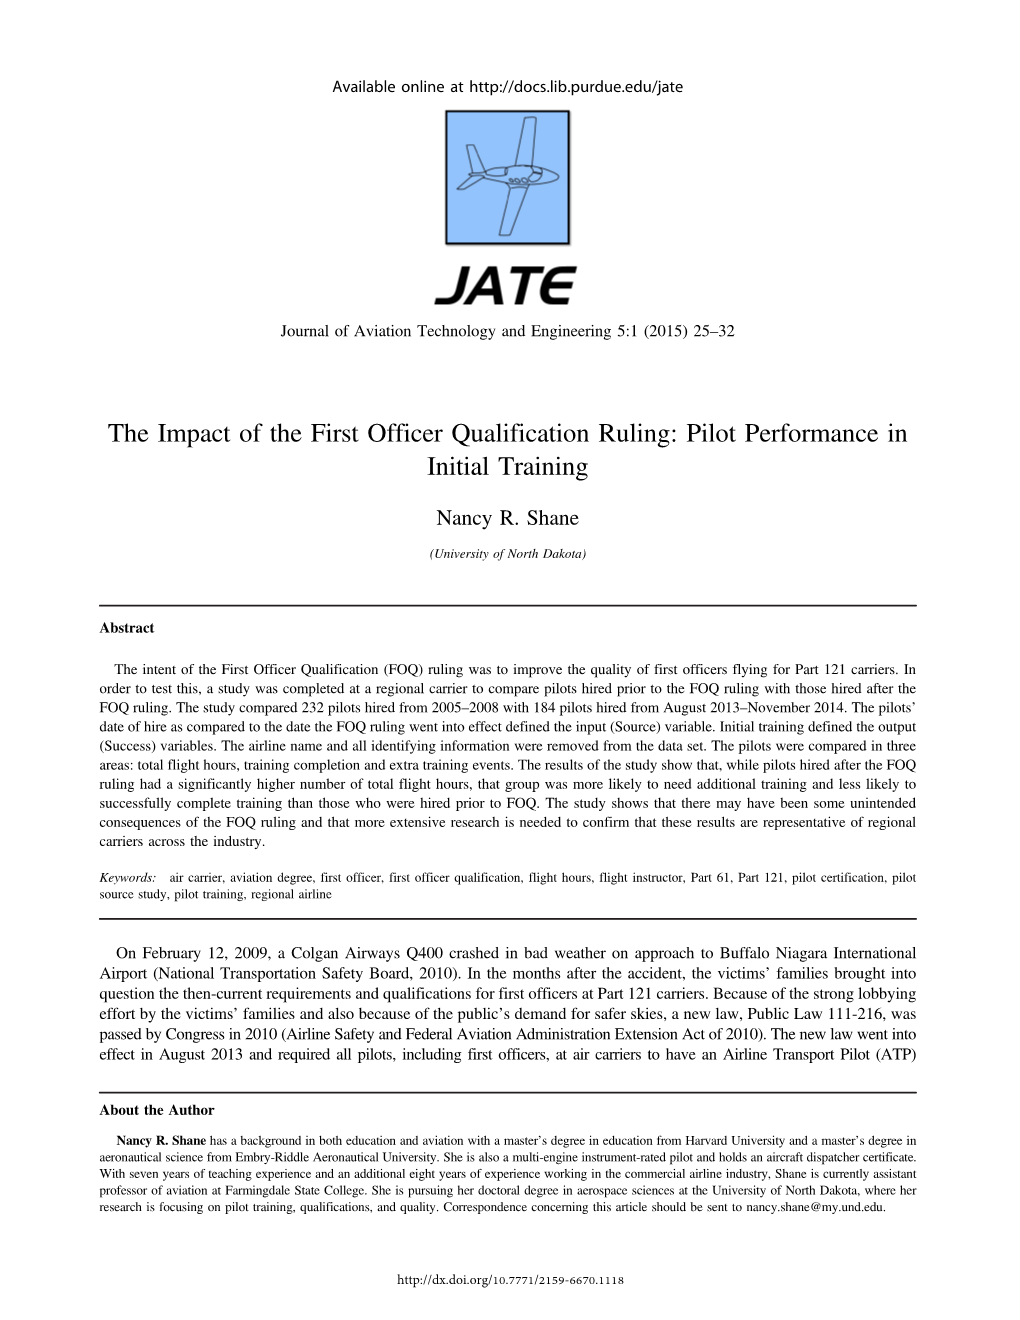 The Impact of the First Officer Qualification Ruling: Pilot Performance in Initial Training